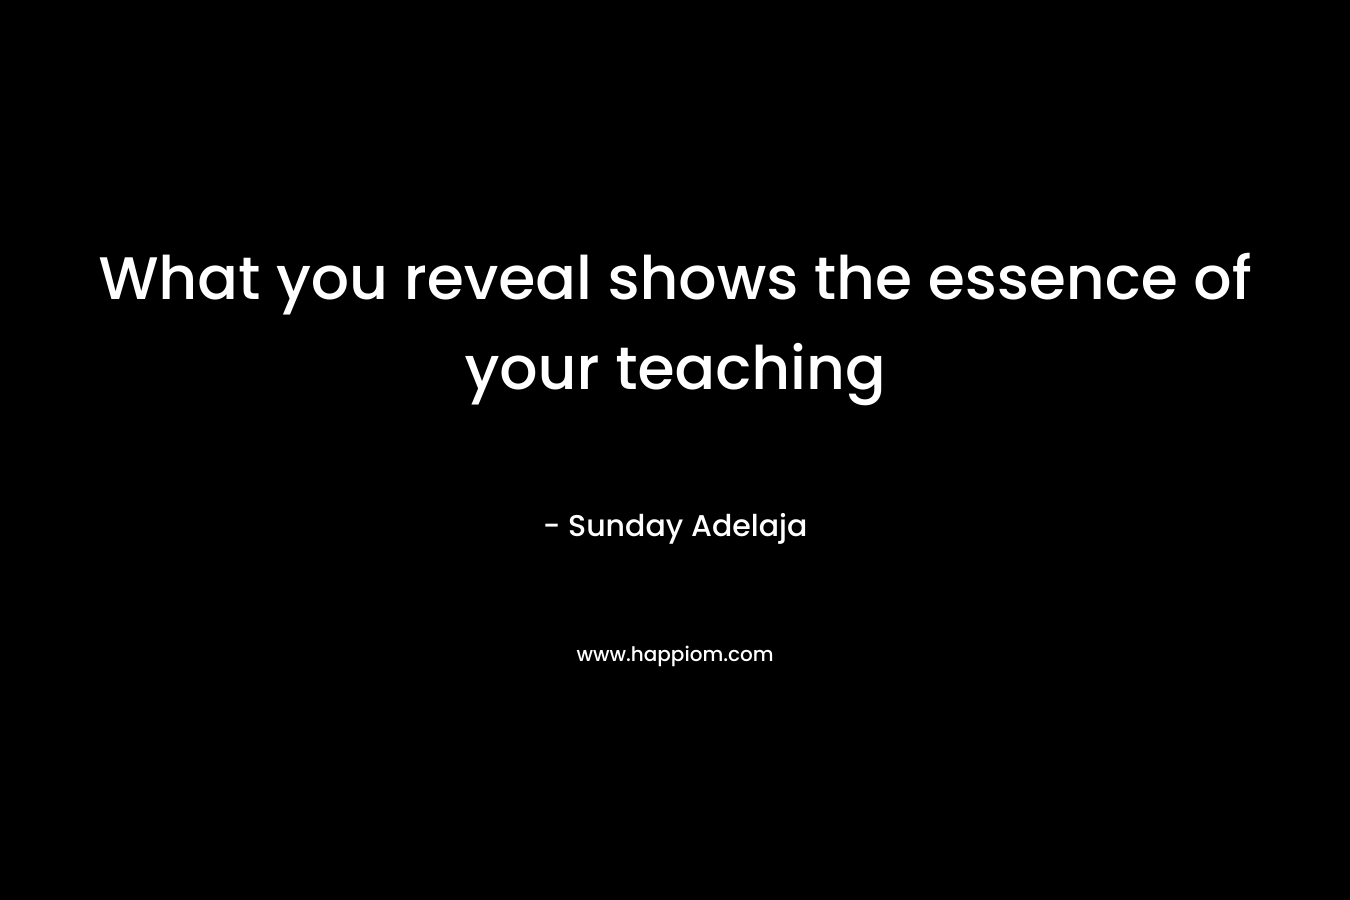 What you reveal shows the essence of your teaching